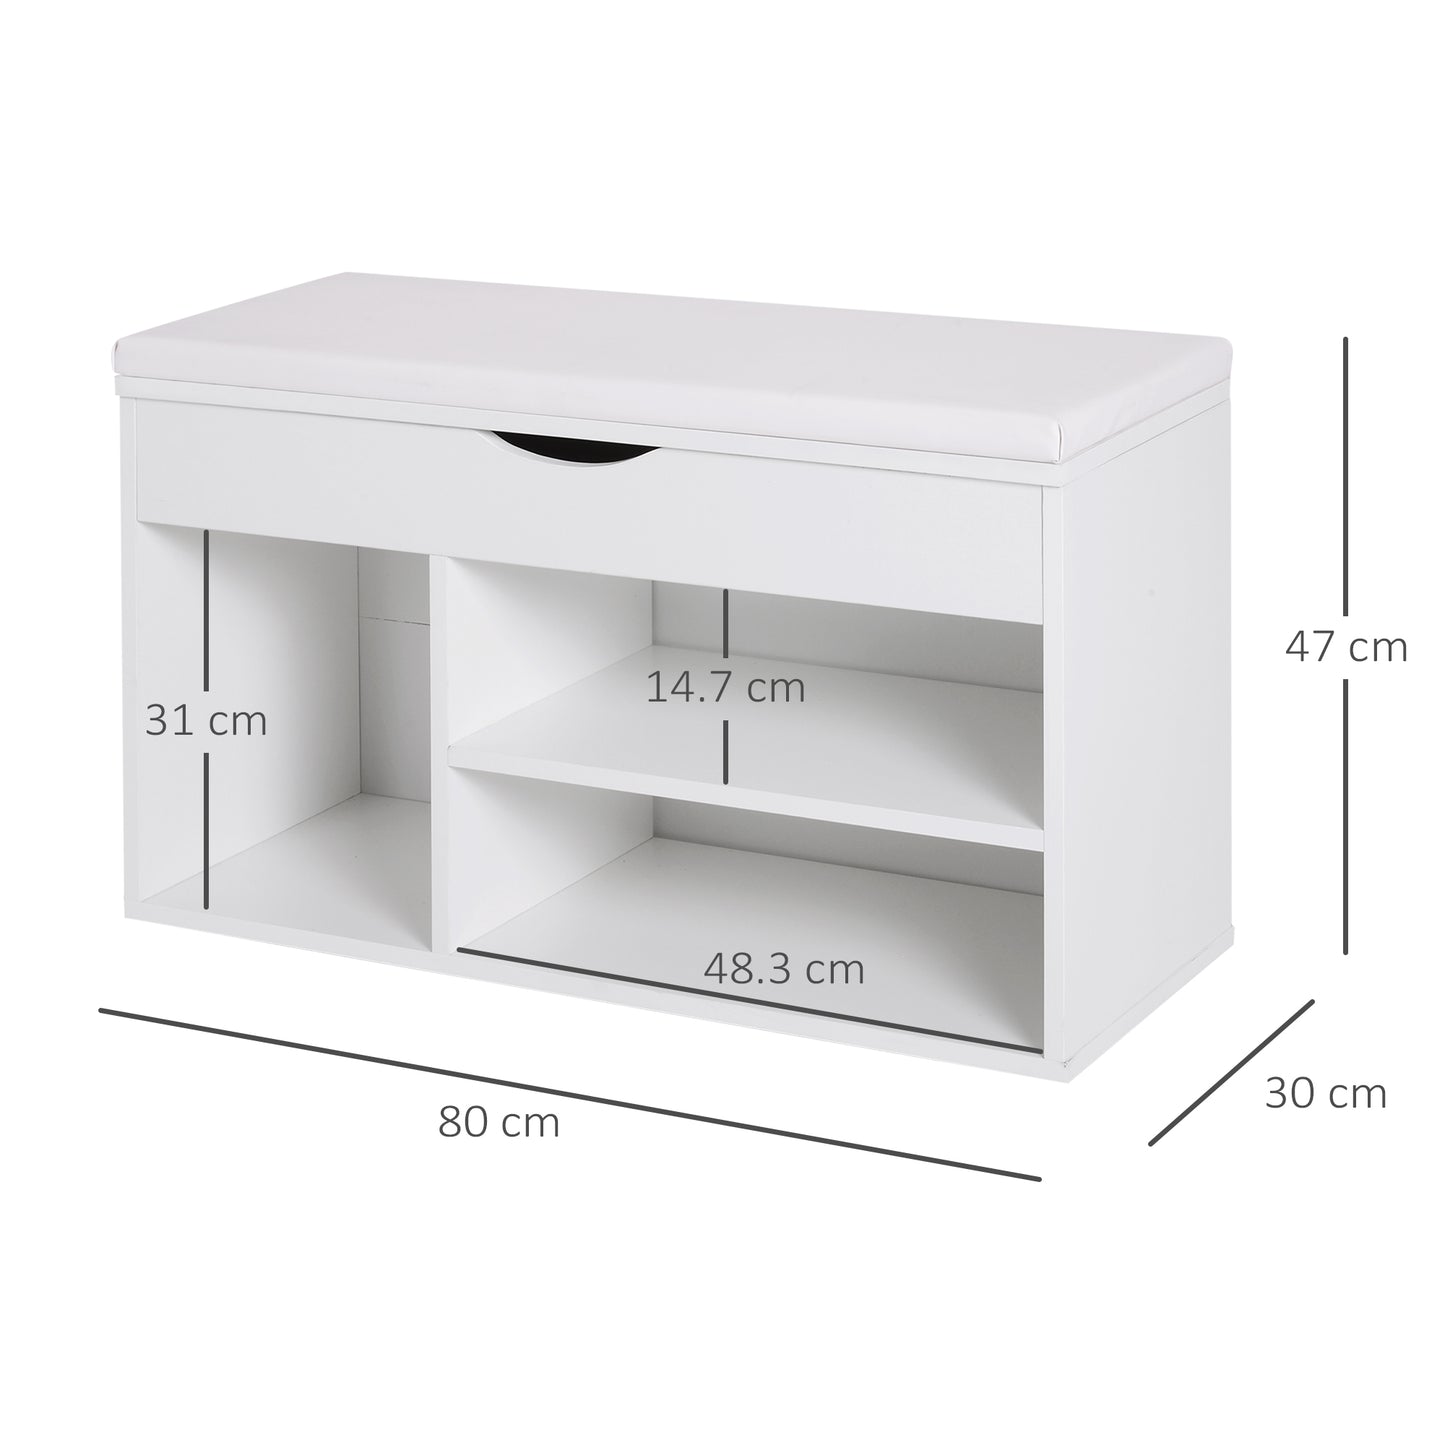 HOMCOM Shoe Cabinet, 80Lx30Wx47H cm, Particle Board-White